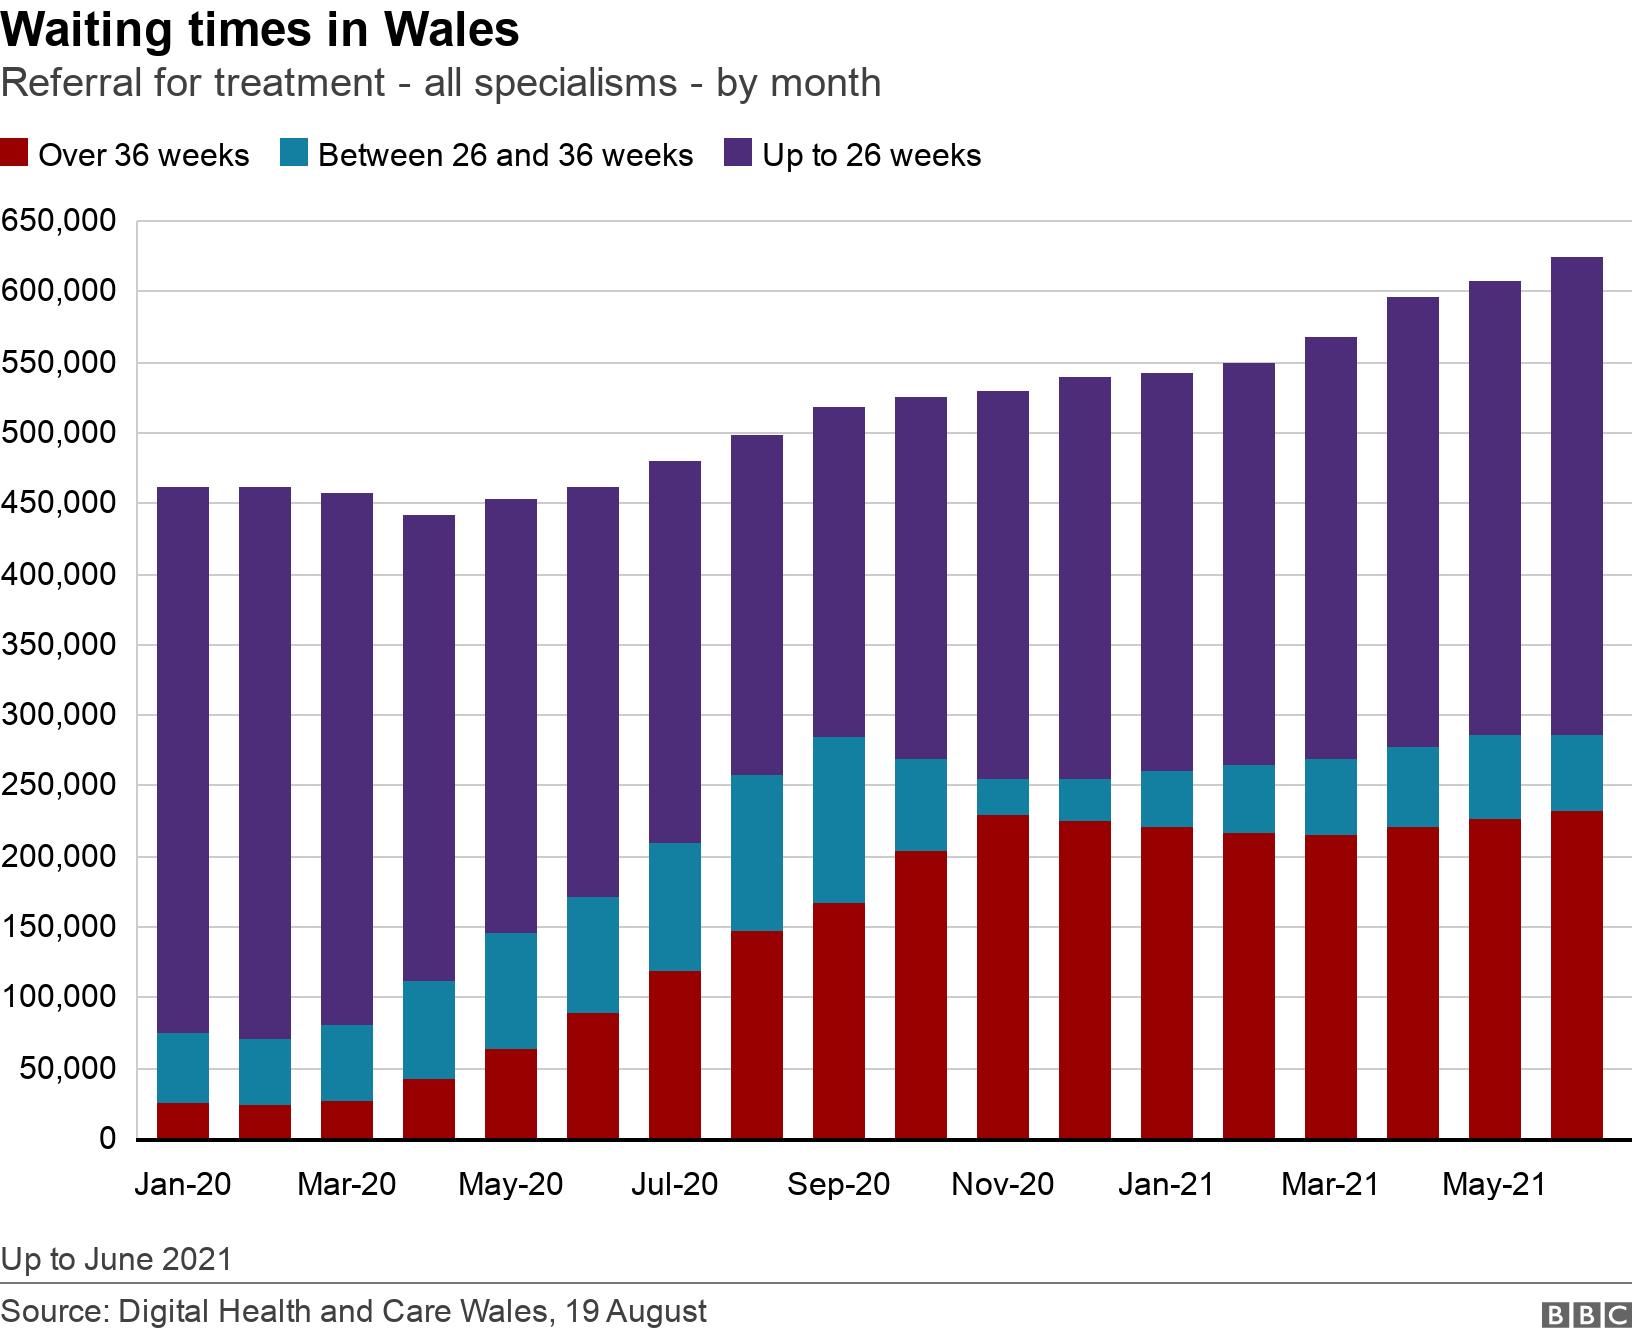 Waiting times in Wales. Referral for treatment - all specialisms - by month.  Up to June 2021.